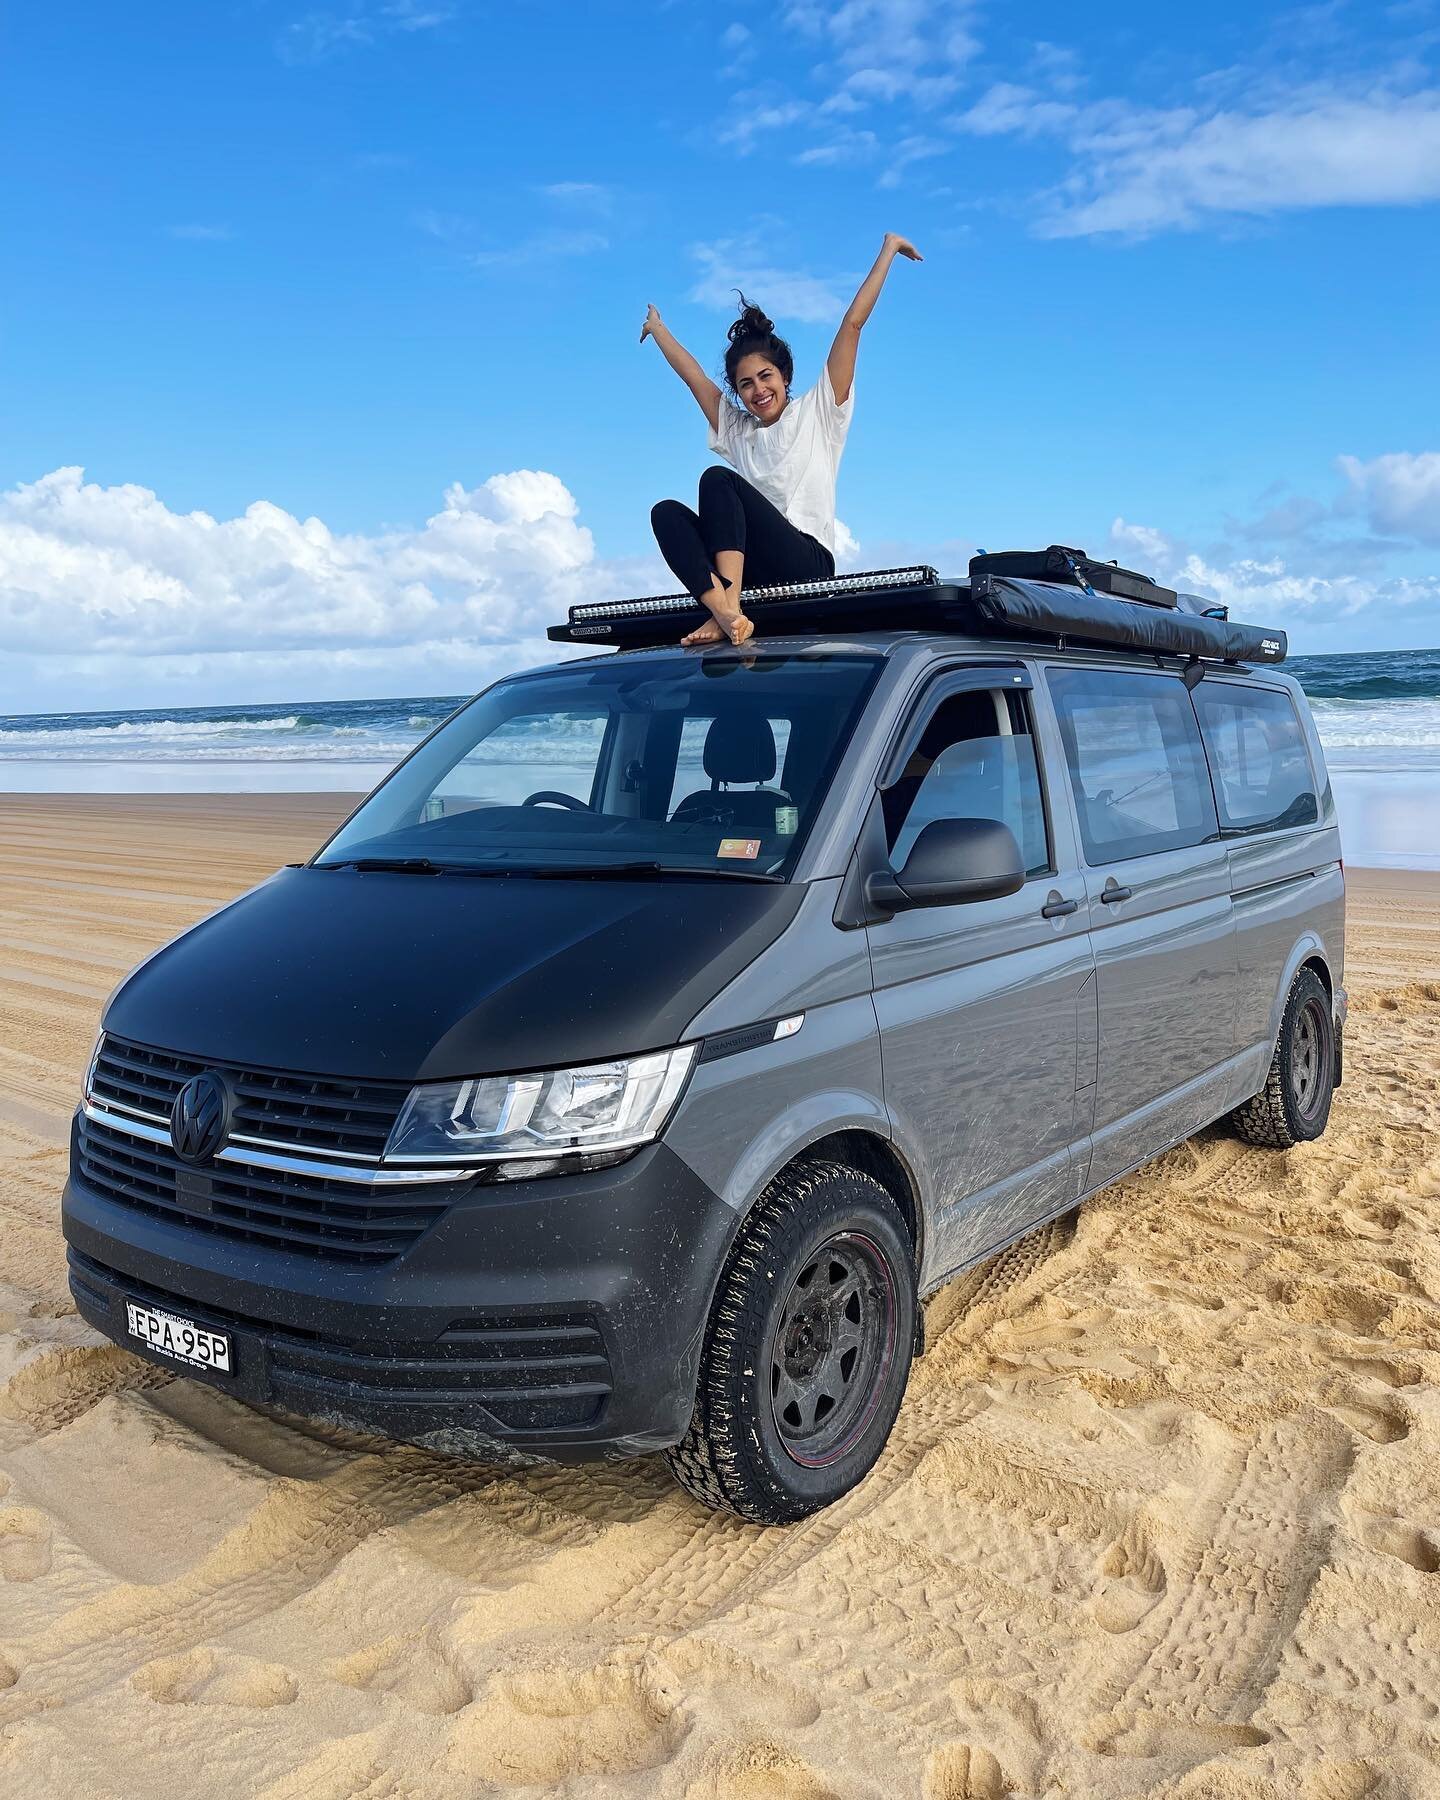 Lots of fun seeing what the latest vans can do! Many surprised and impressed looks and enquiries at the only van on the beach having no trouble in the sand. 

Our Highlander campers come suited for off-road adventure with 4MOTION, differential lock a